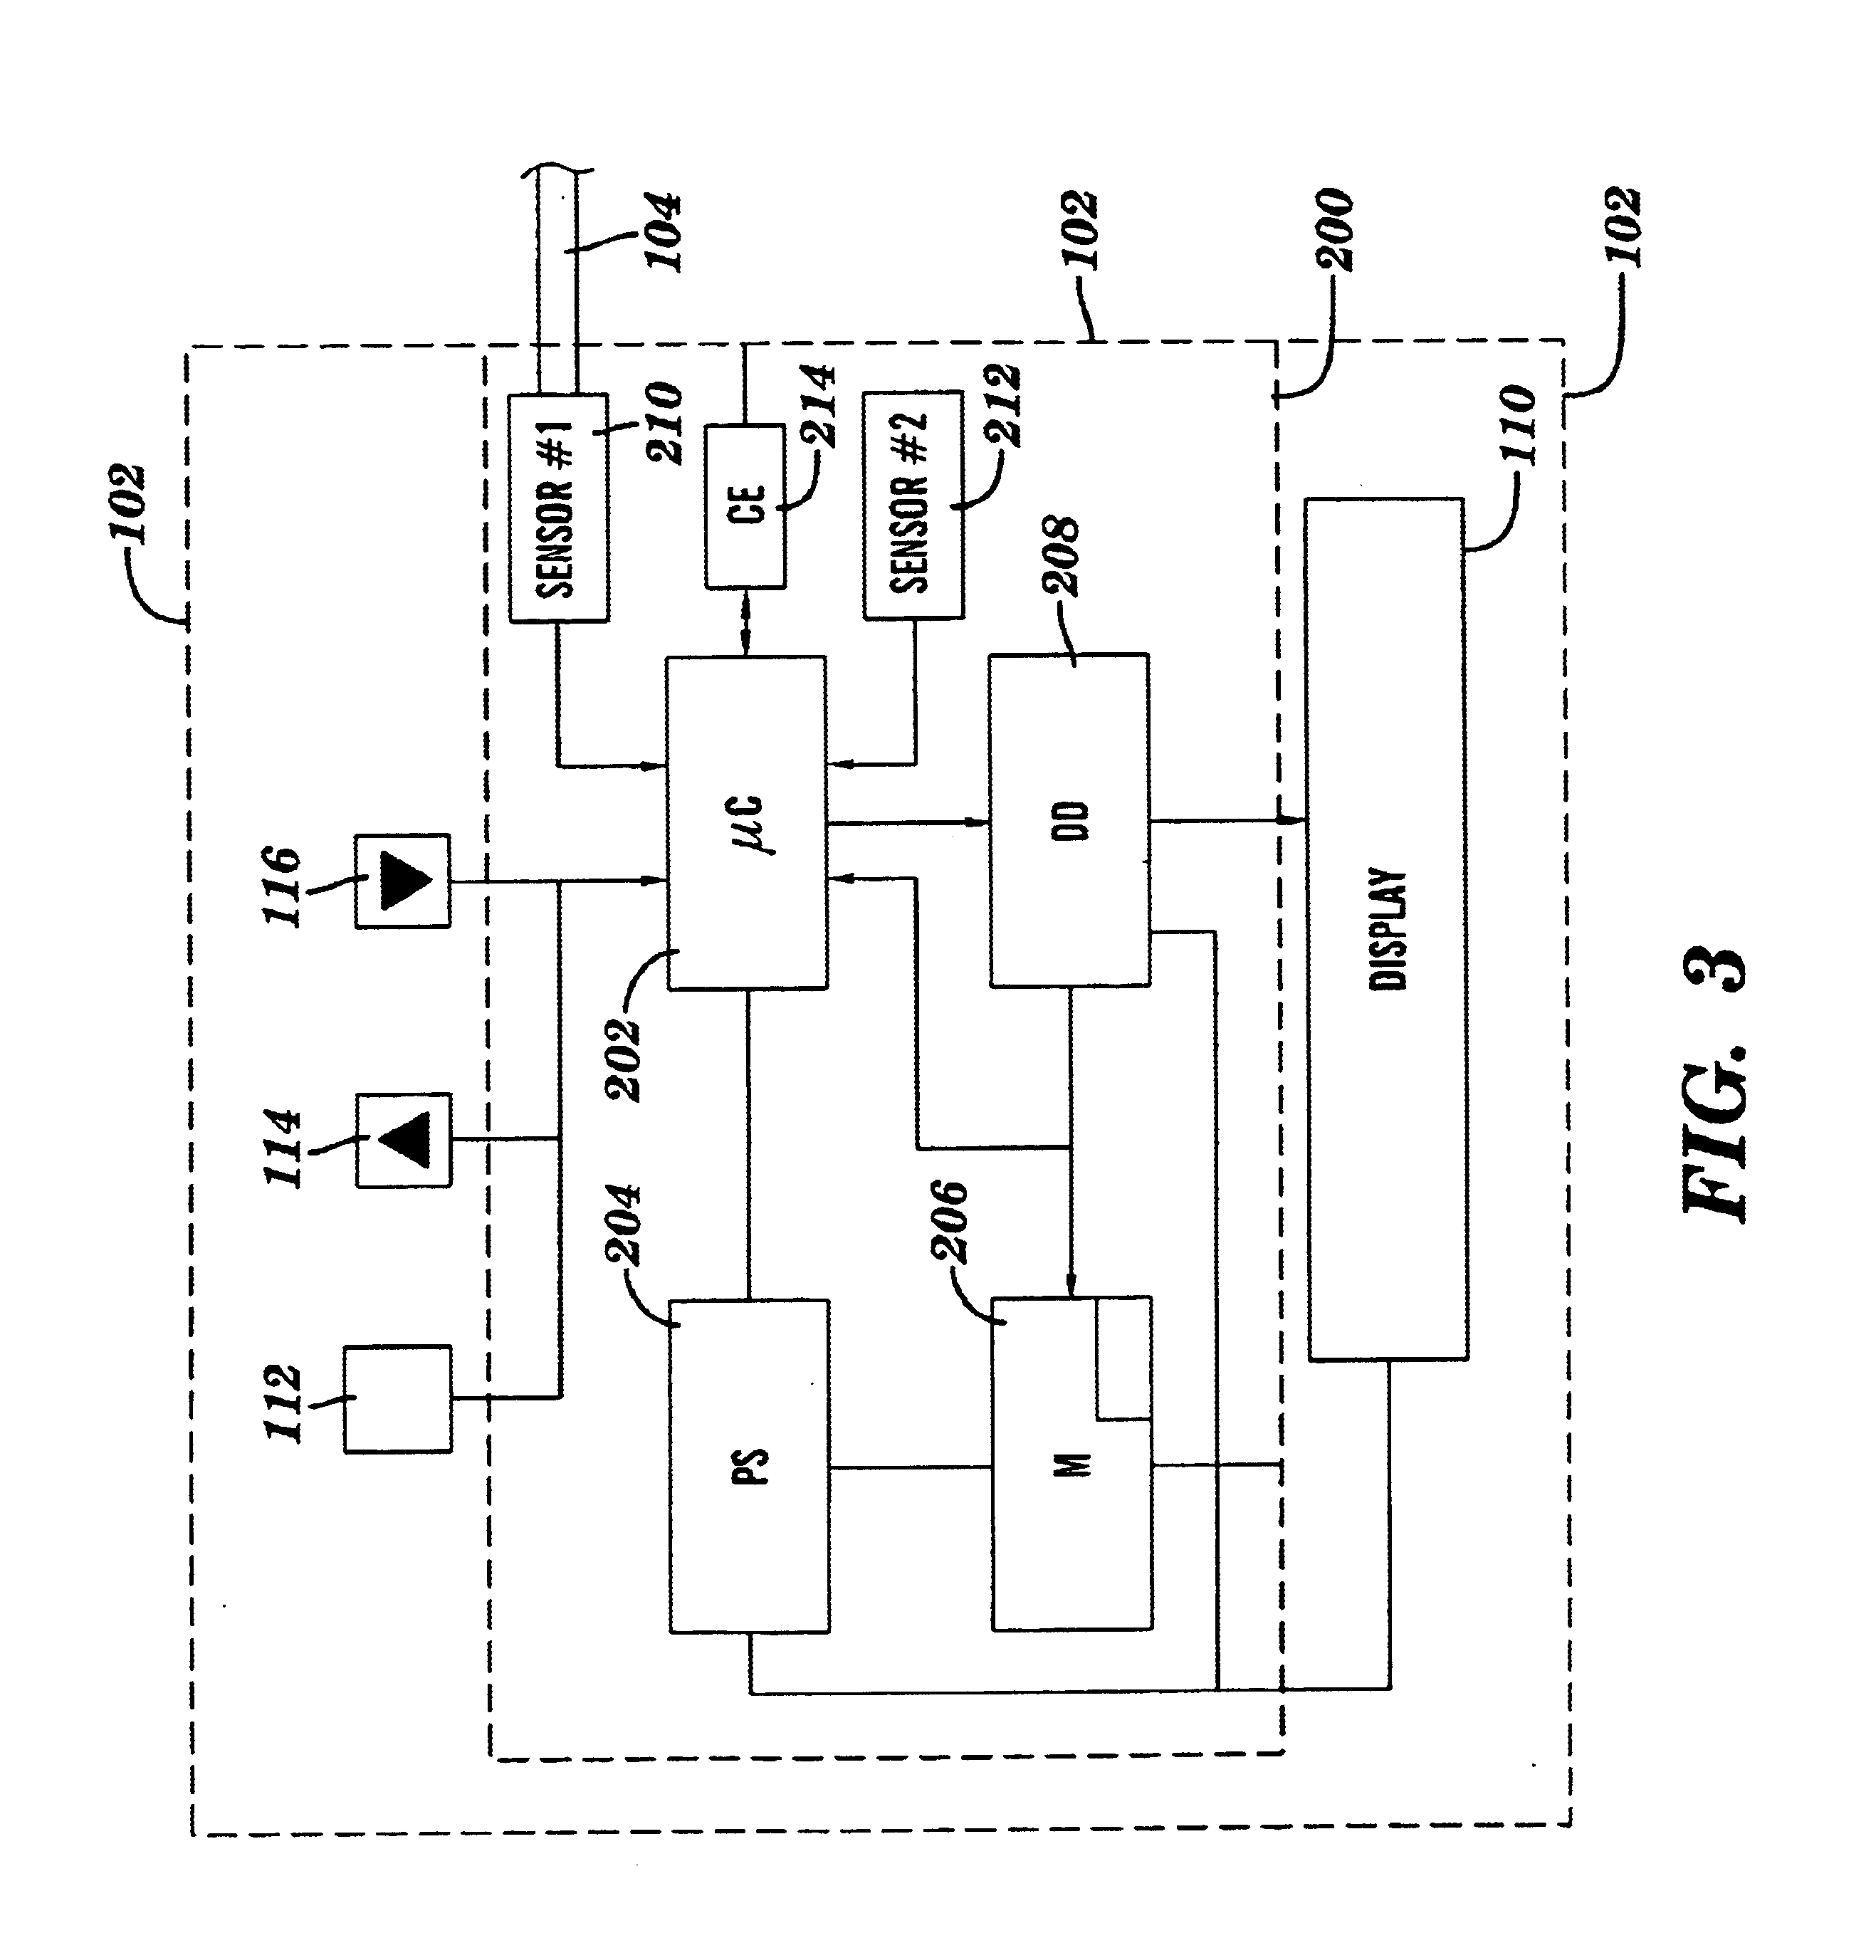 Electronic device for the preparation of mixed drinks